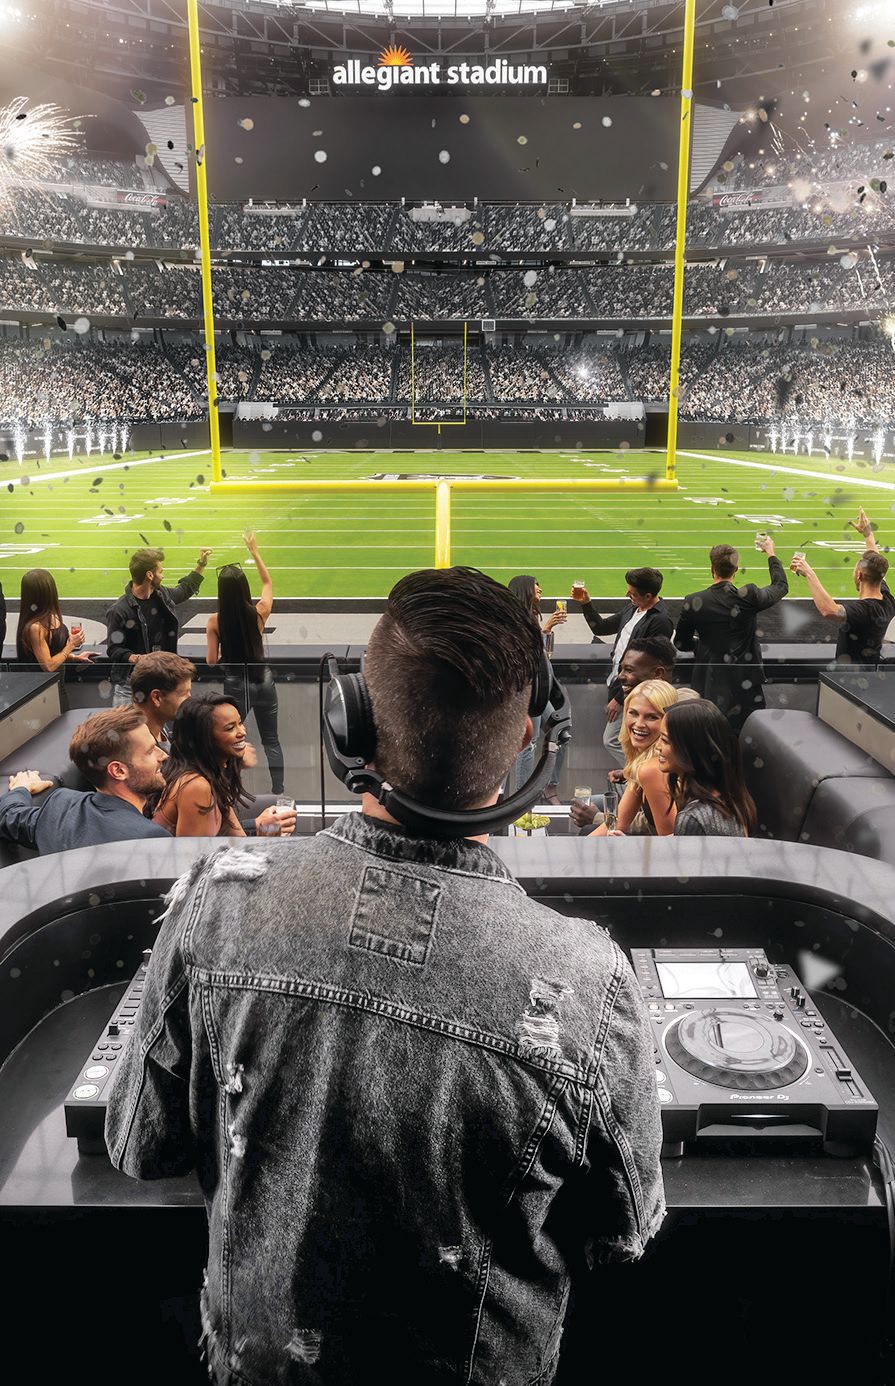 Wynn Field Club’s dual DJ booths allows DJs to perform for the entire stadium or directly within the club space. PHOTO BY ANTHONY MAIR